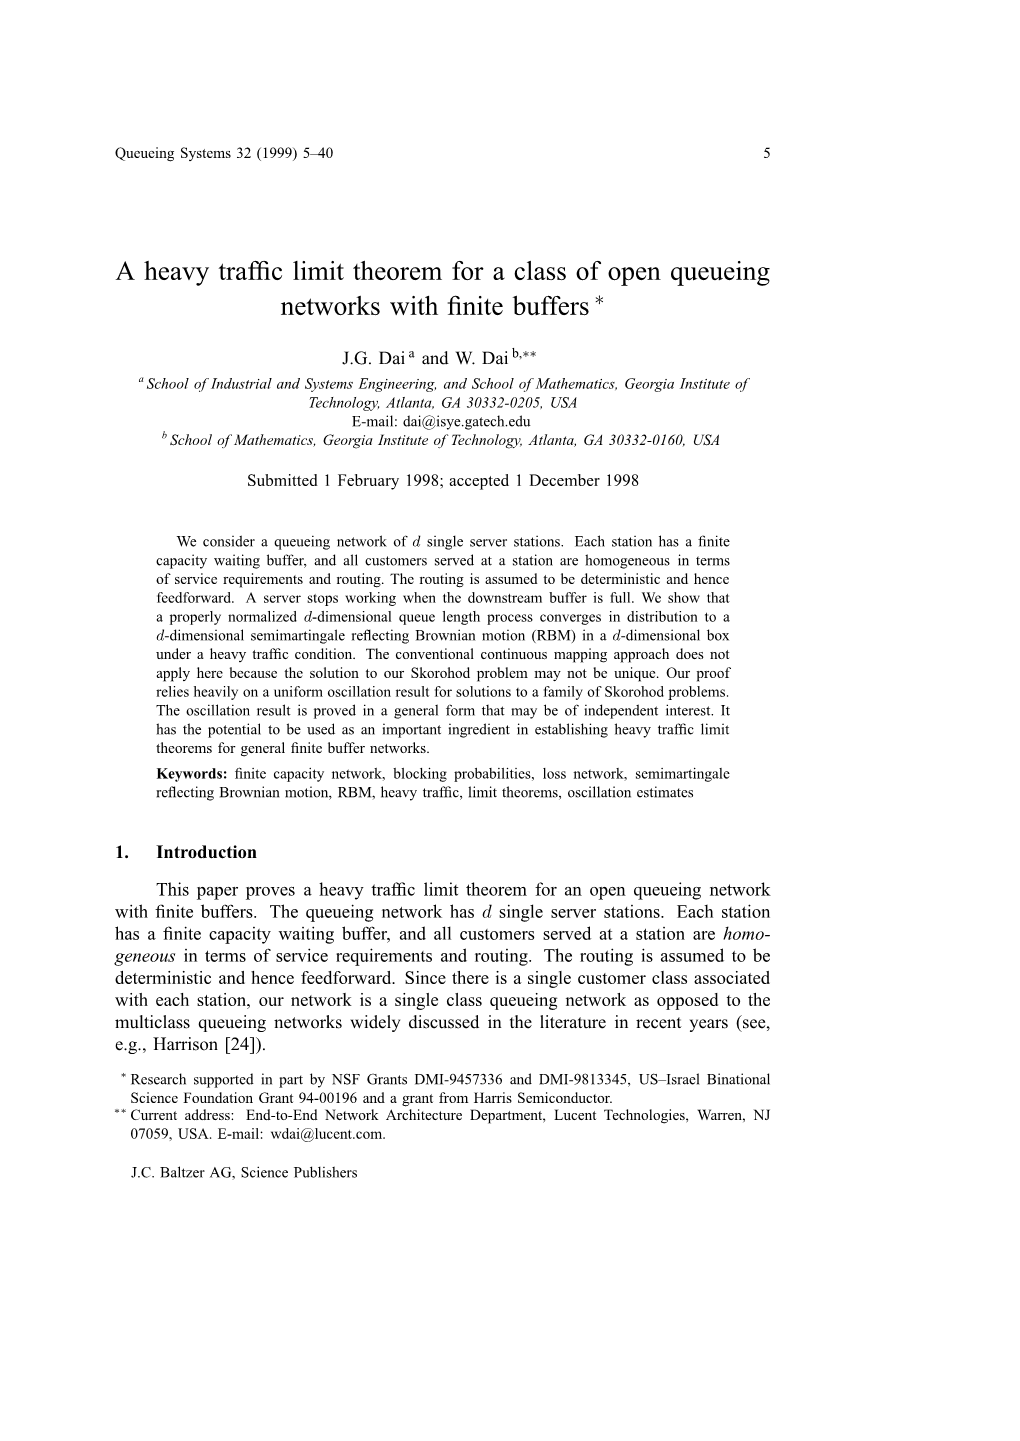 A Heavy Traffic Limit Theorem for a Class of Open Queueing Networks With